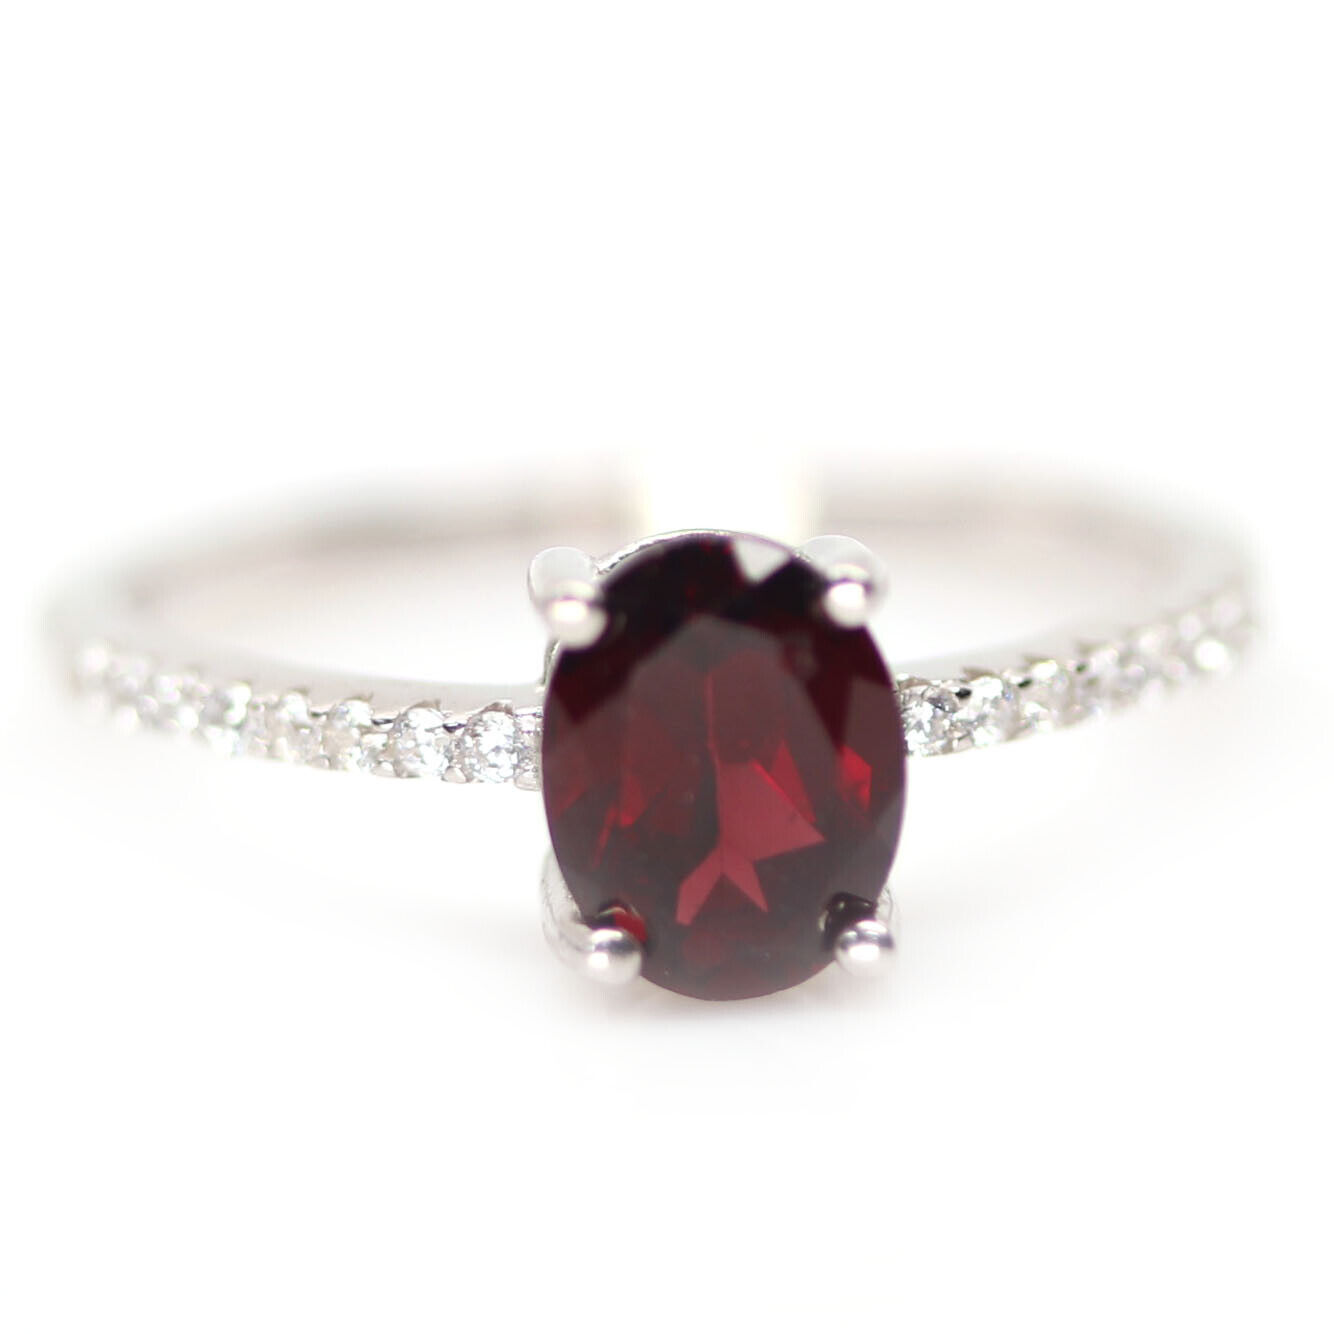 A 925 silver ring set with an oval cut garnet and white stone set shoulders, (N.5).